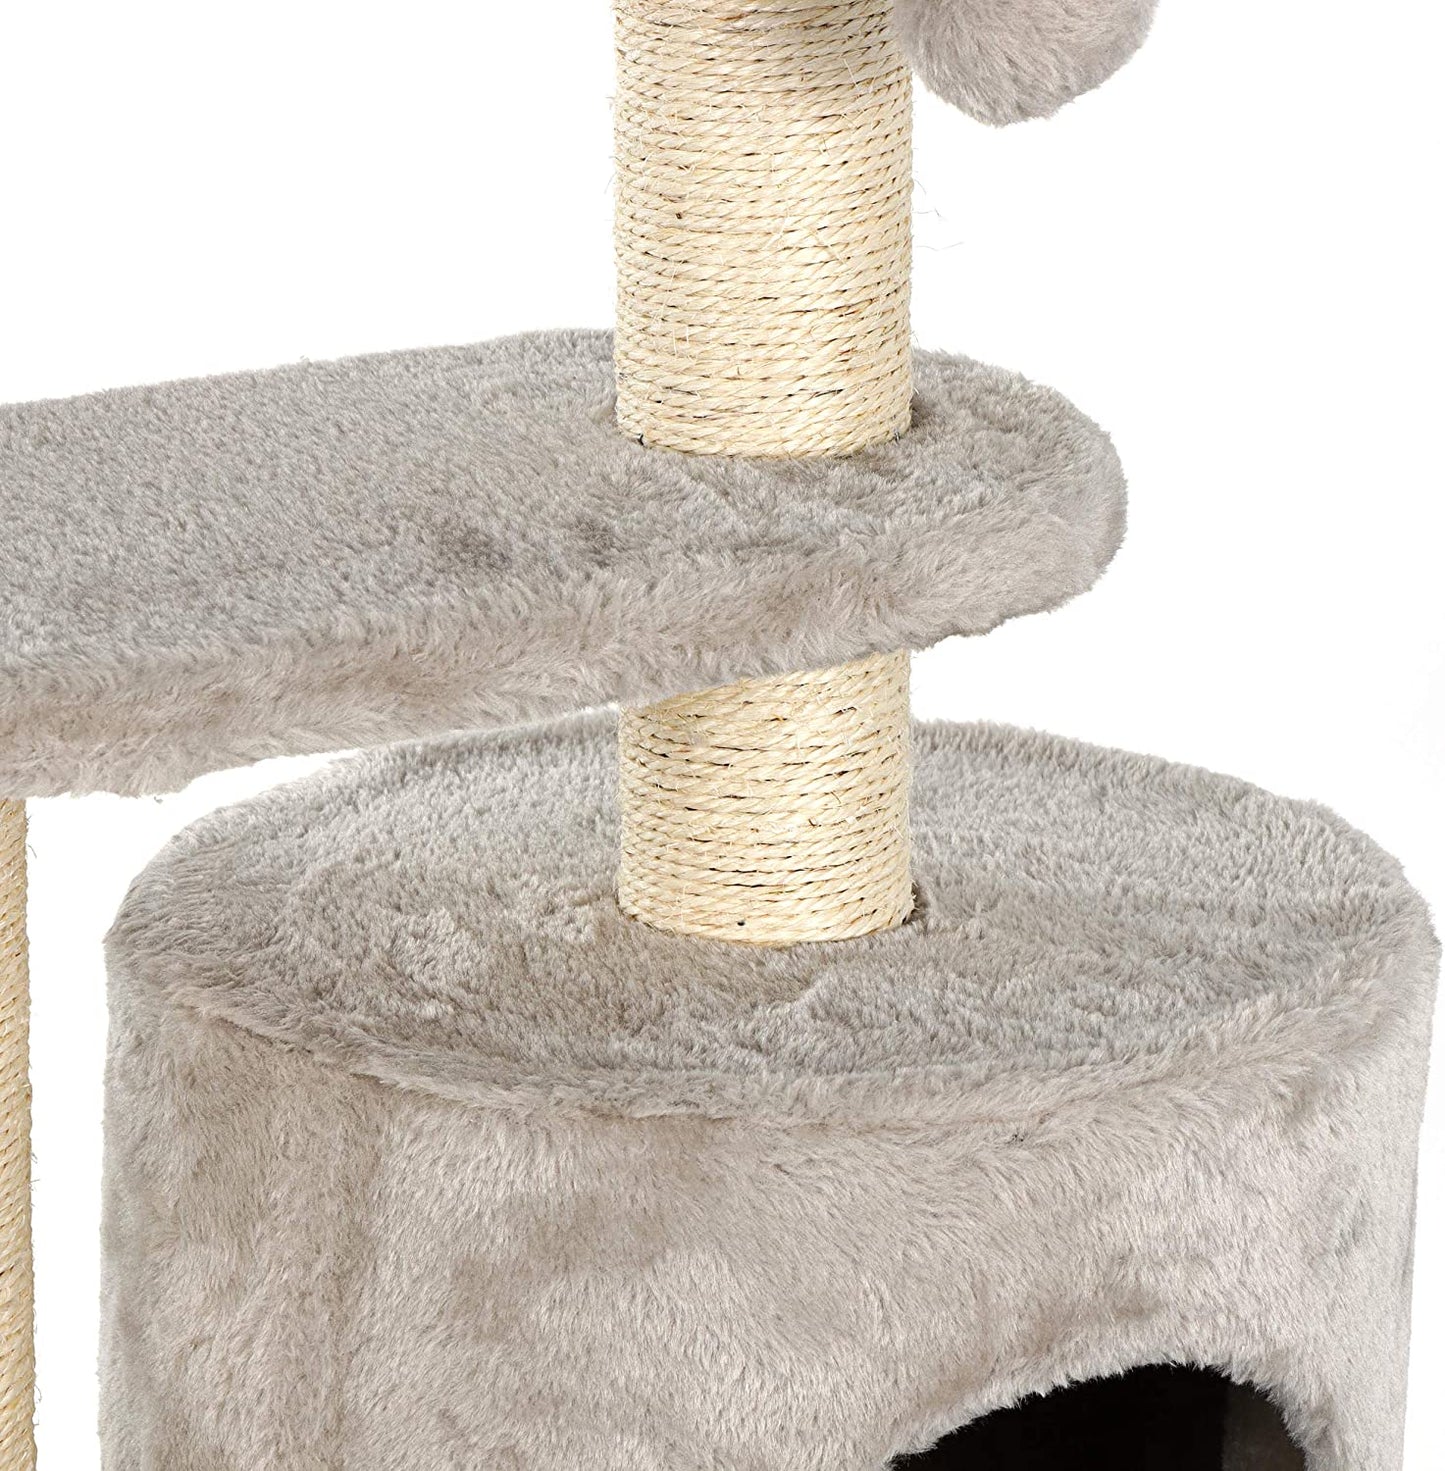 Cat Tree with Cave, Cat Tower Furniture Scratching Post for Kittens Pet House Play